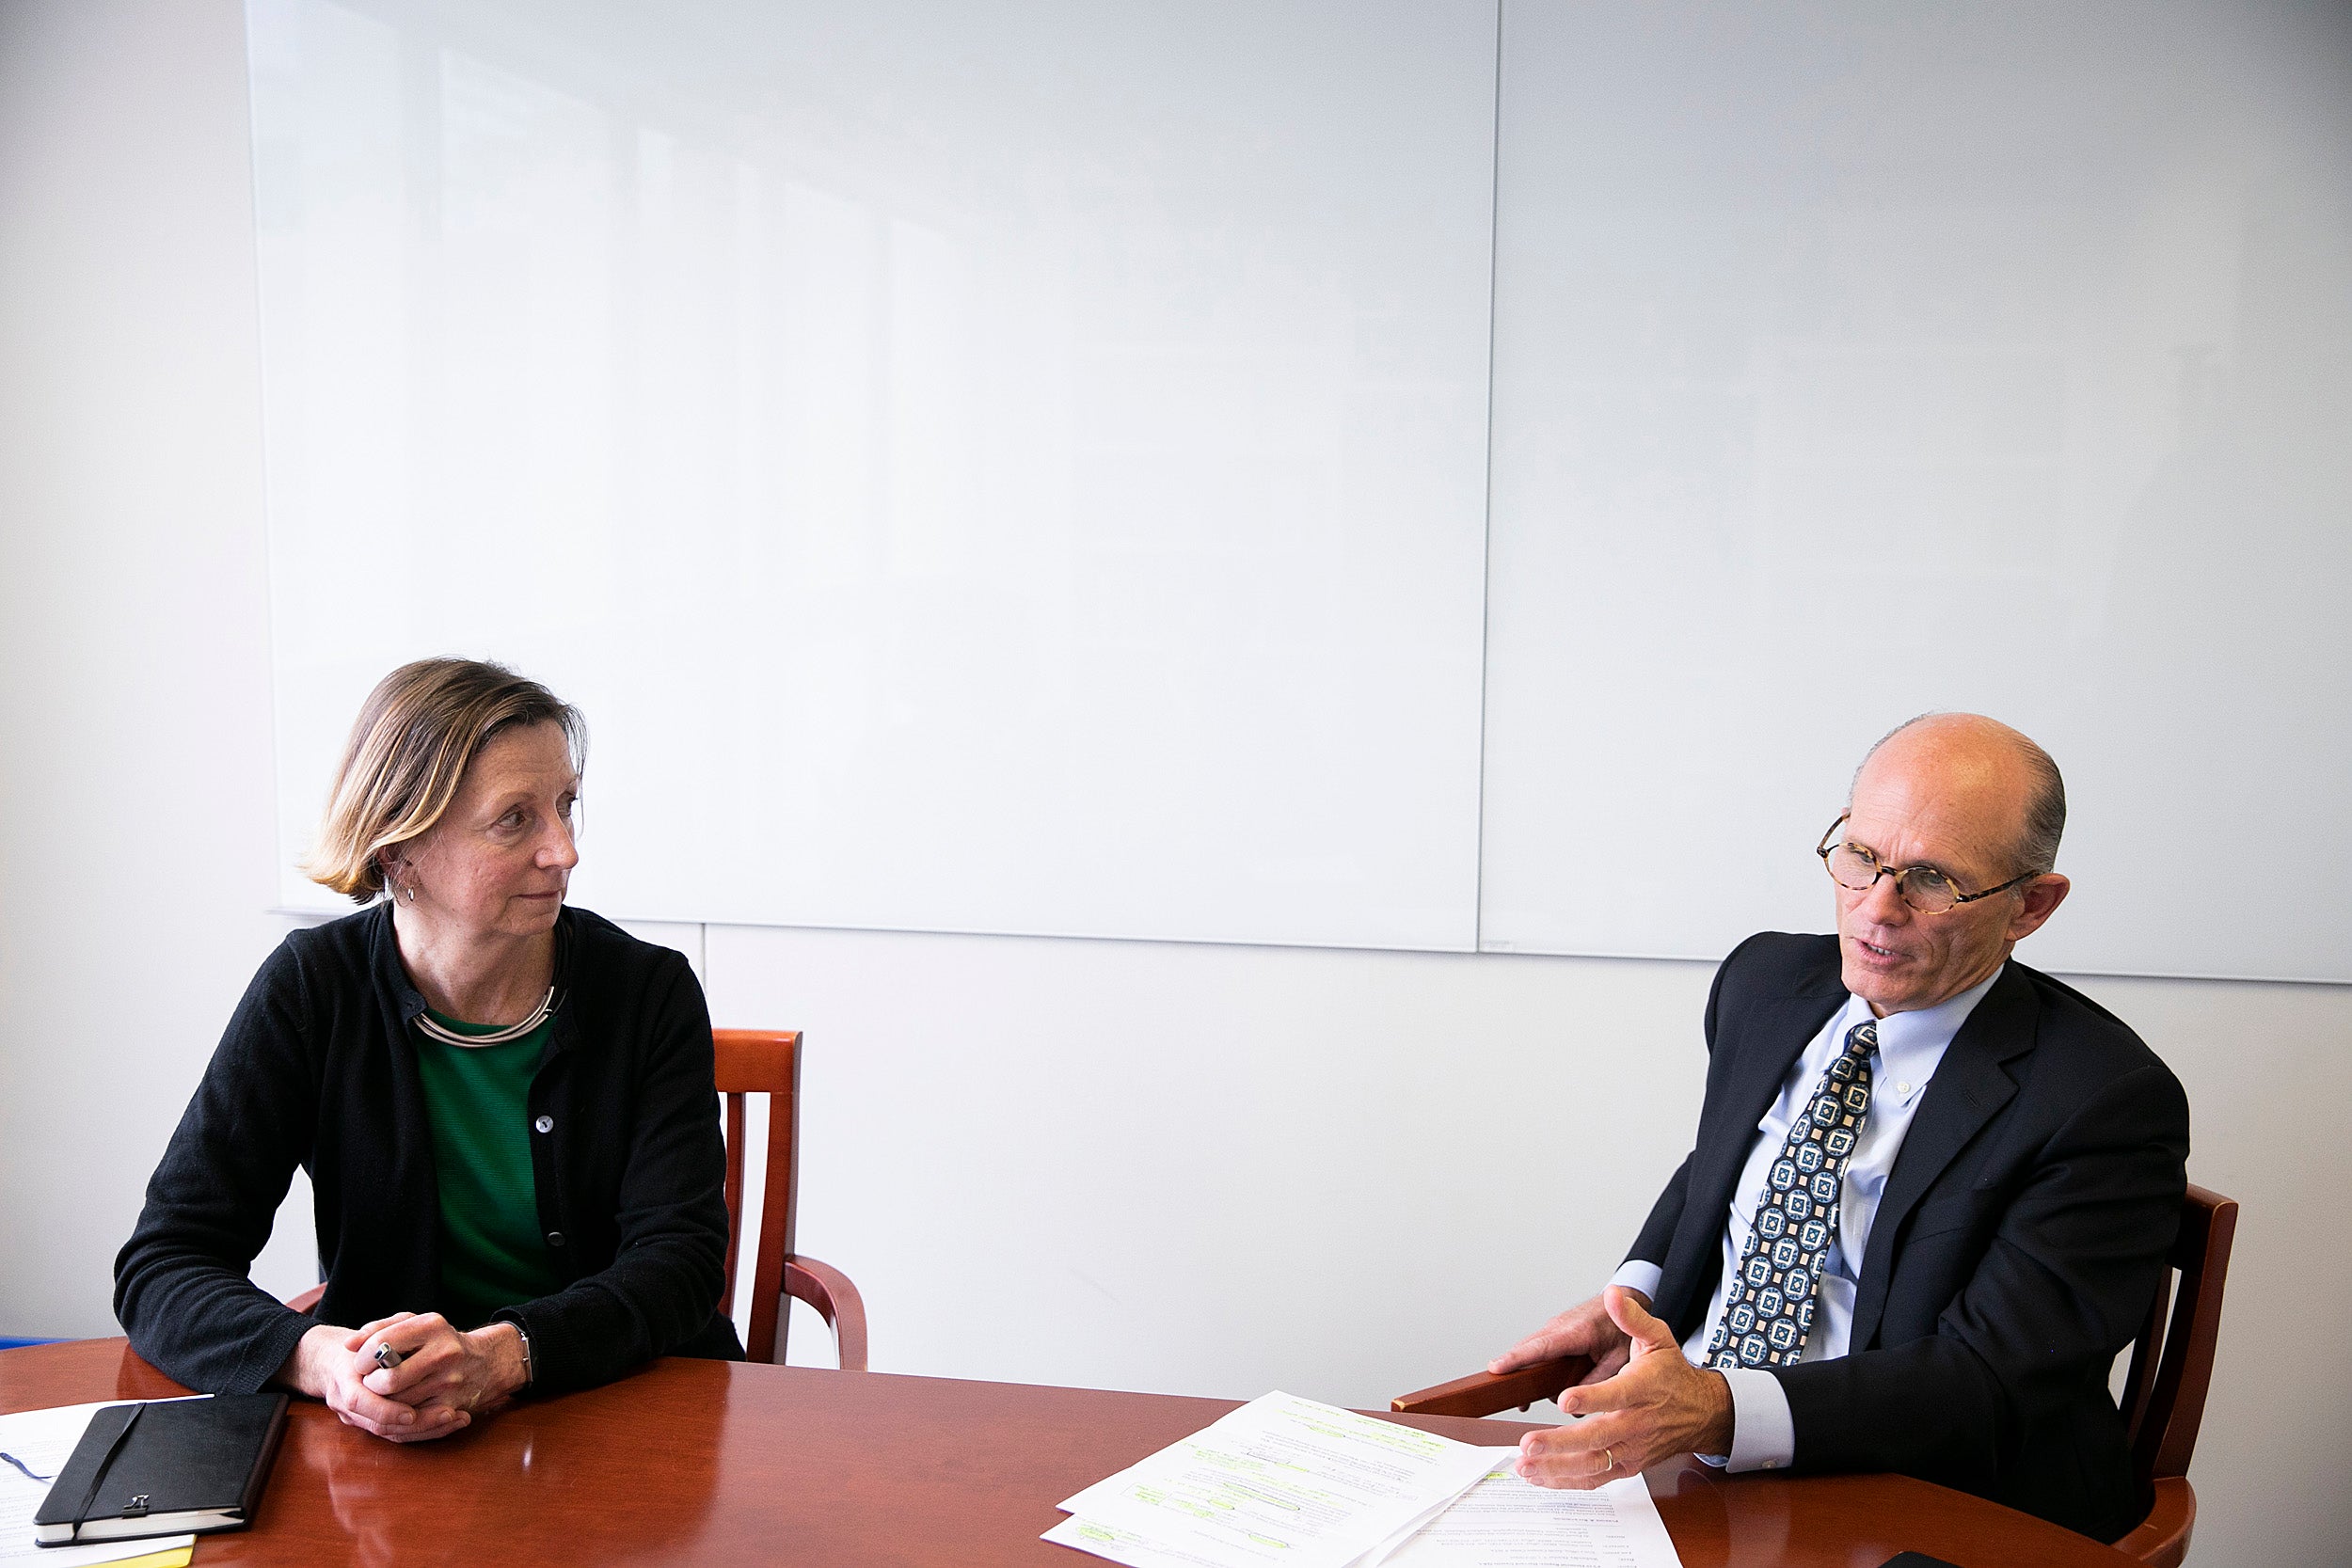 Harvard University's Executive Vice President Katie Lapp and Chief Financial Officer and Vice President for Finance Tom Hollister speak about Harvard's annual financial performance.